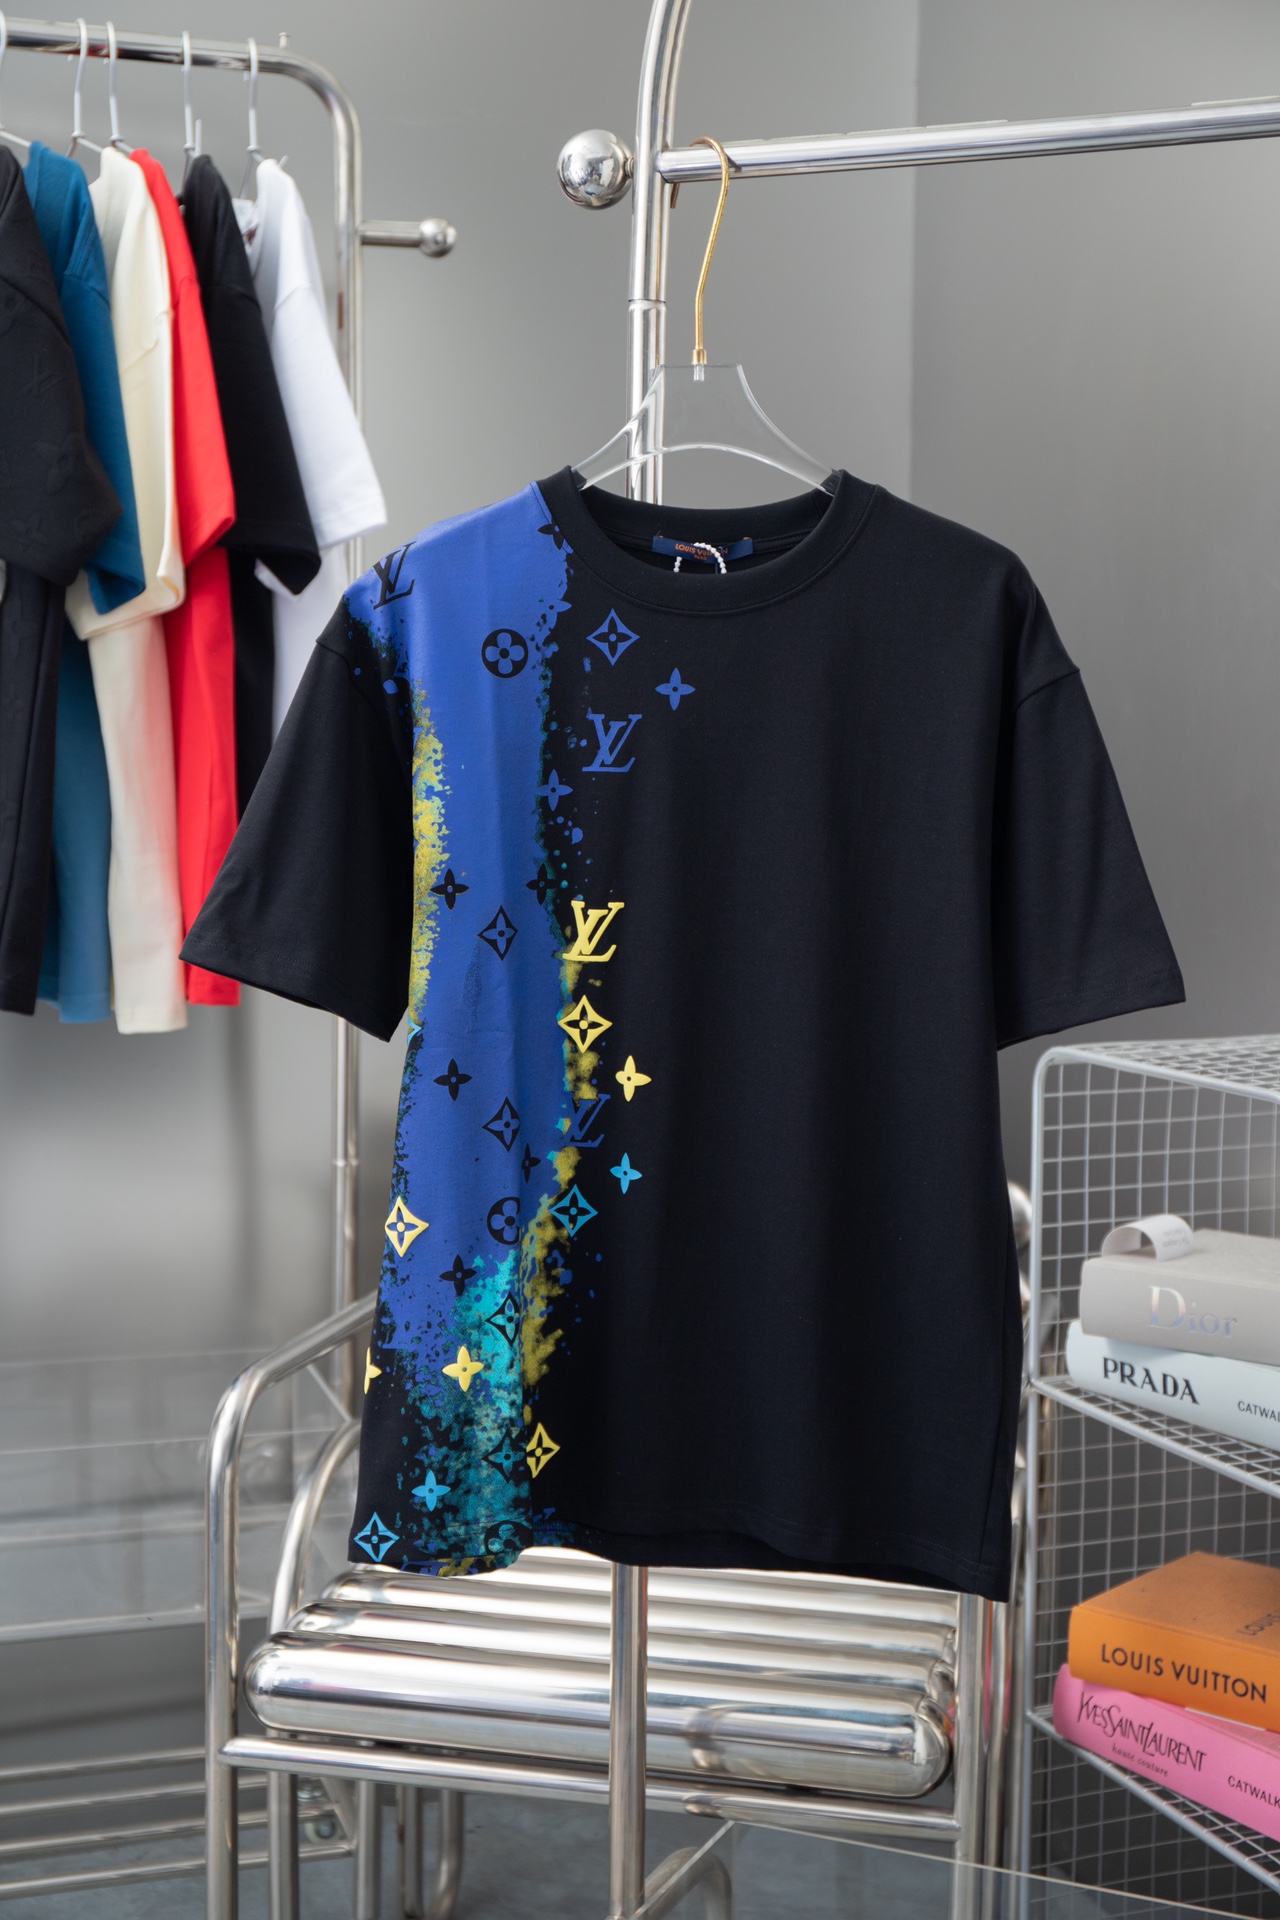 Top Quality Designer Replica
 Louis Vuitton High
 Clothing T-Shirt Doodle Printing Unisex Cotton Spring Collection Fashion Short Sleeve